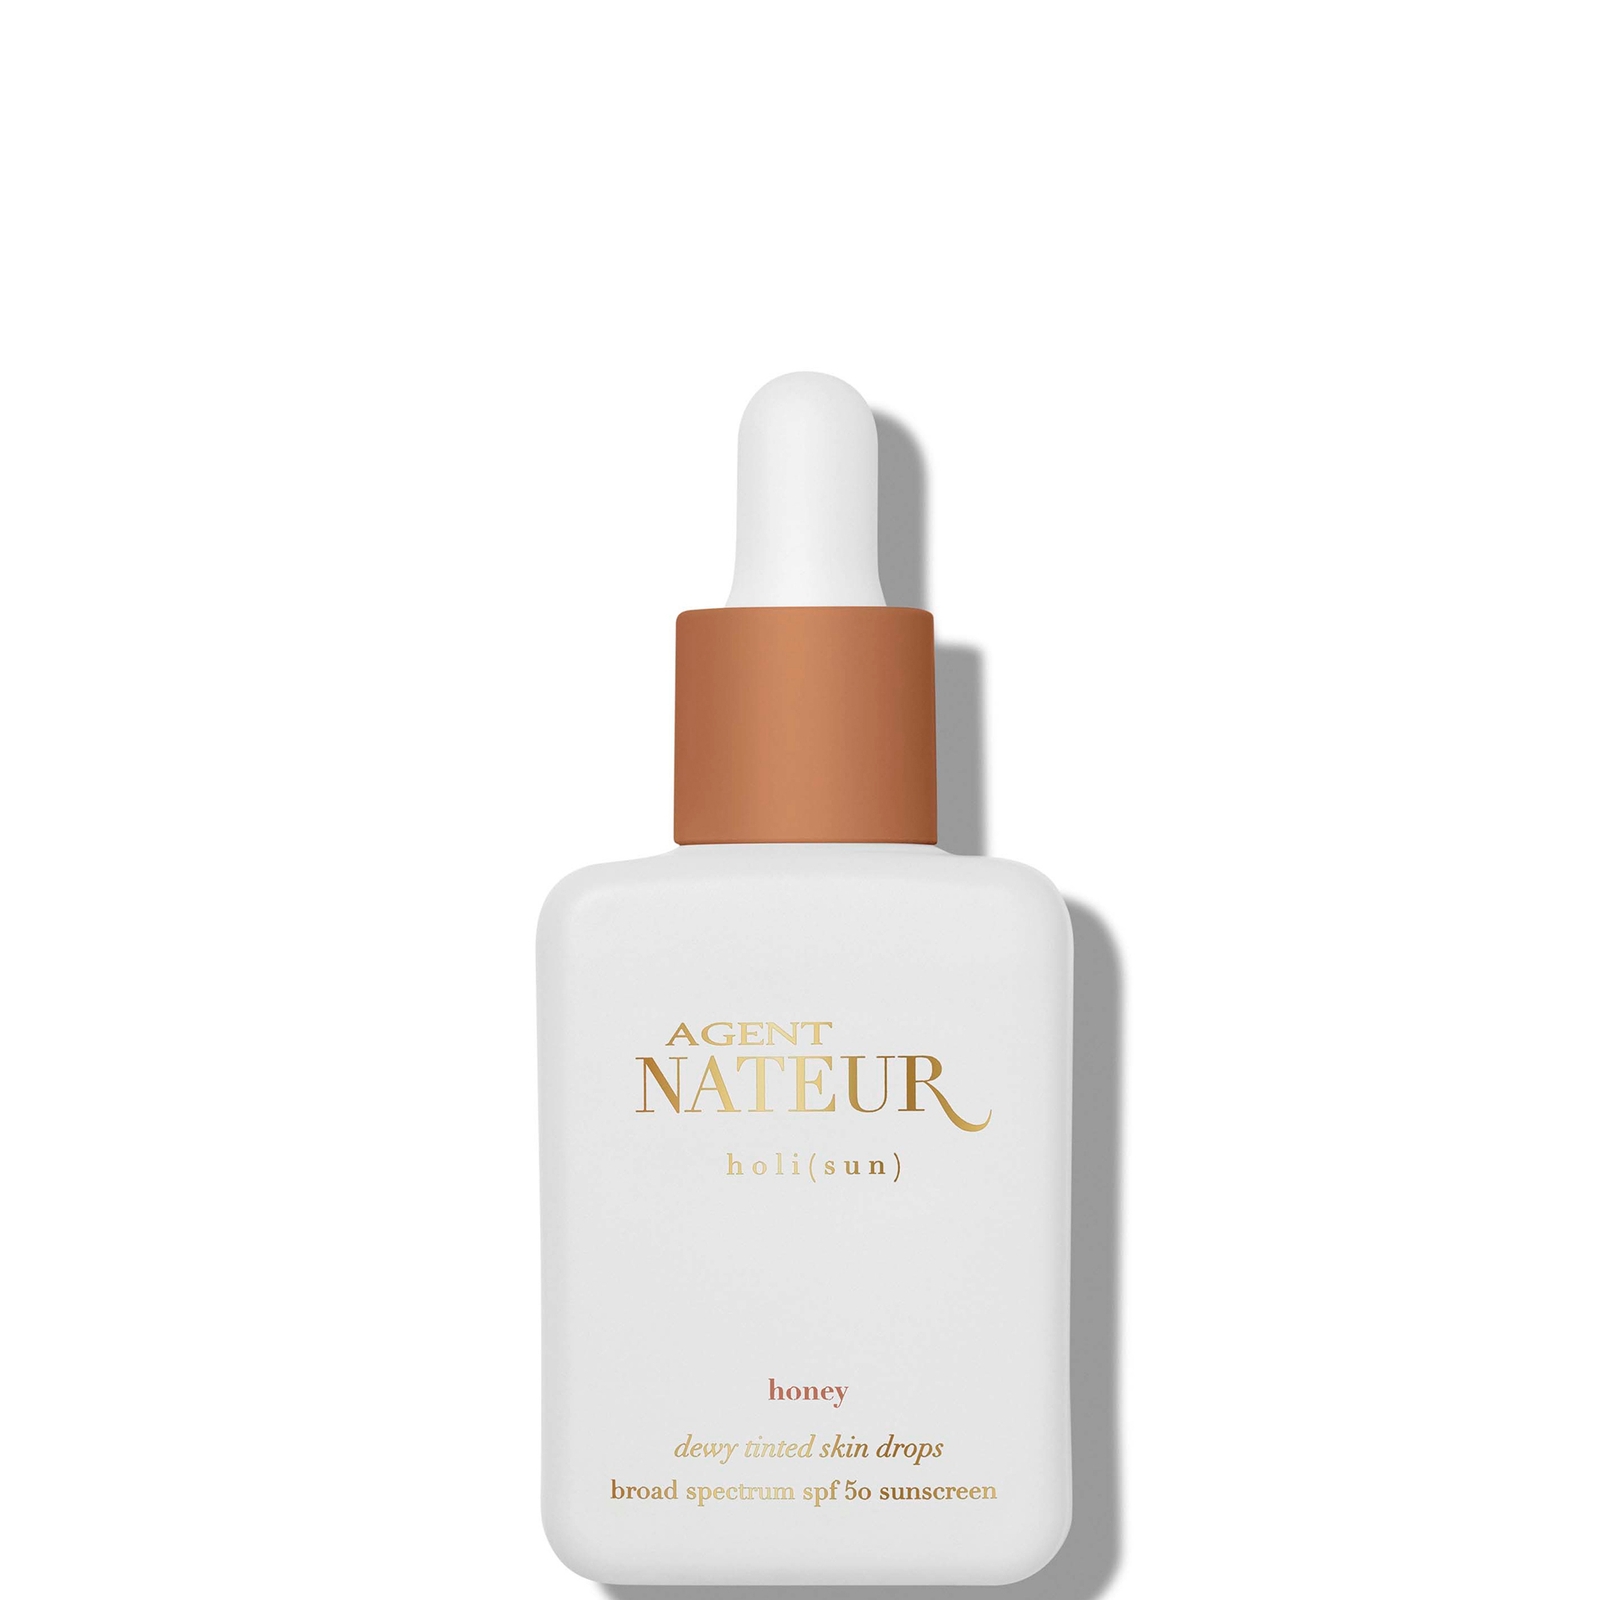 Shop Agent Nateur Holi (sun) Spf 50 Dewy Tinted Skin Drops 30ml (various Shades) In Honey